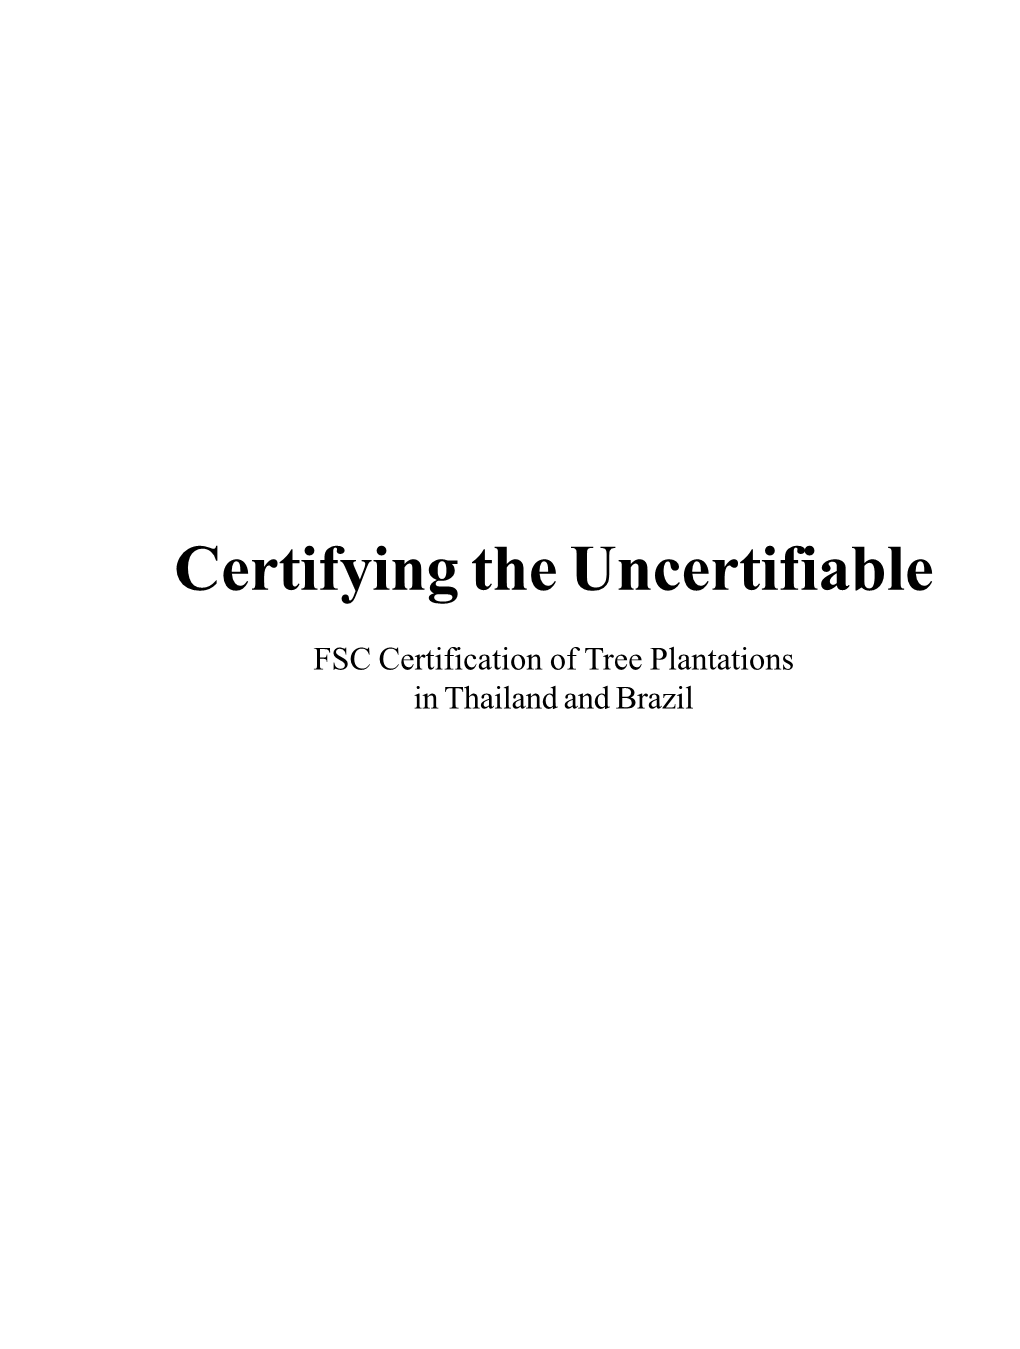 Certifying the Uncertifiable. FSC Certification of Tree Plantations in Thailand and Brazil